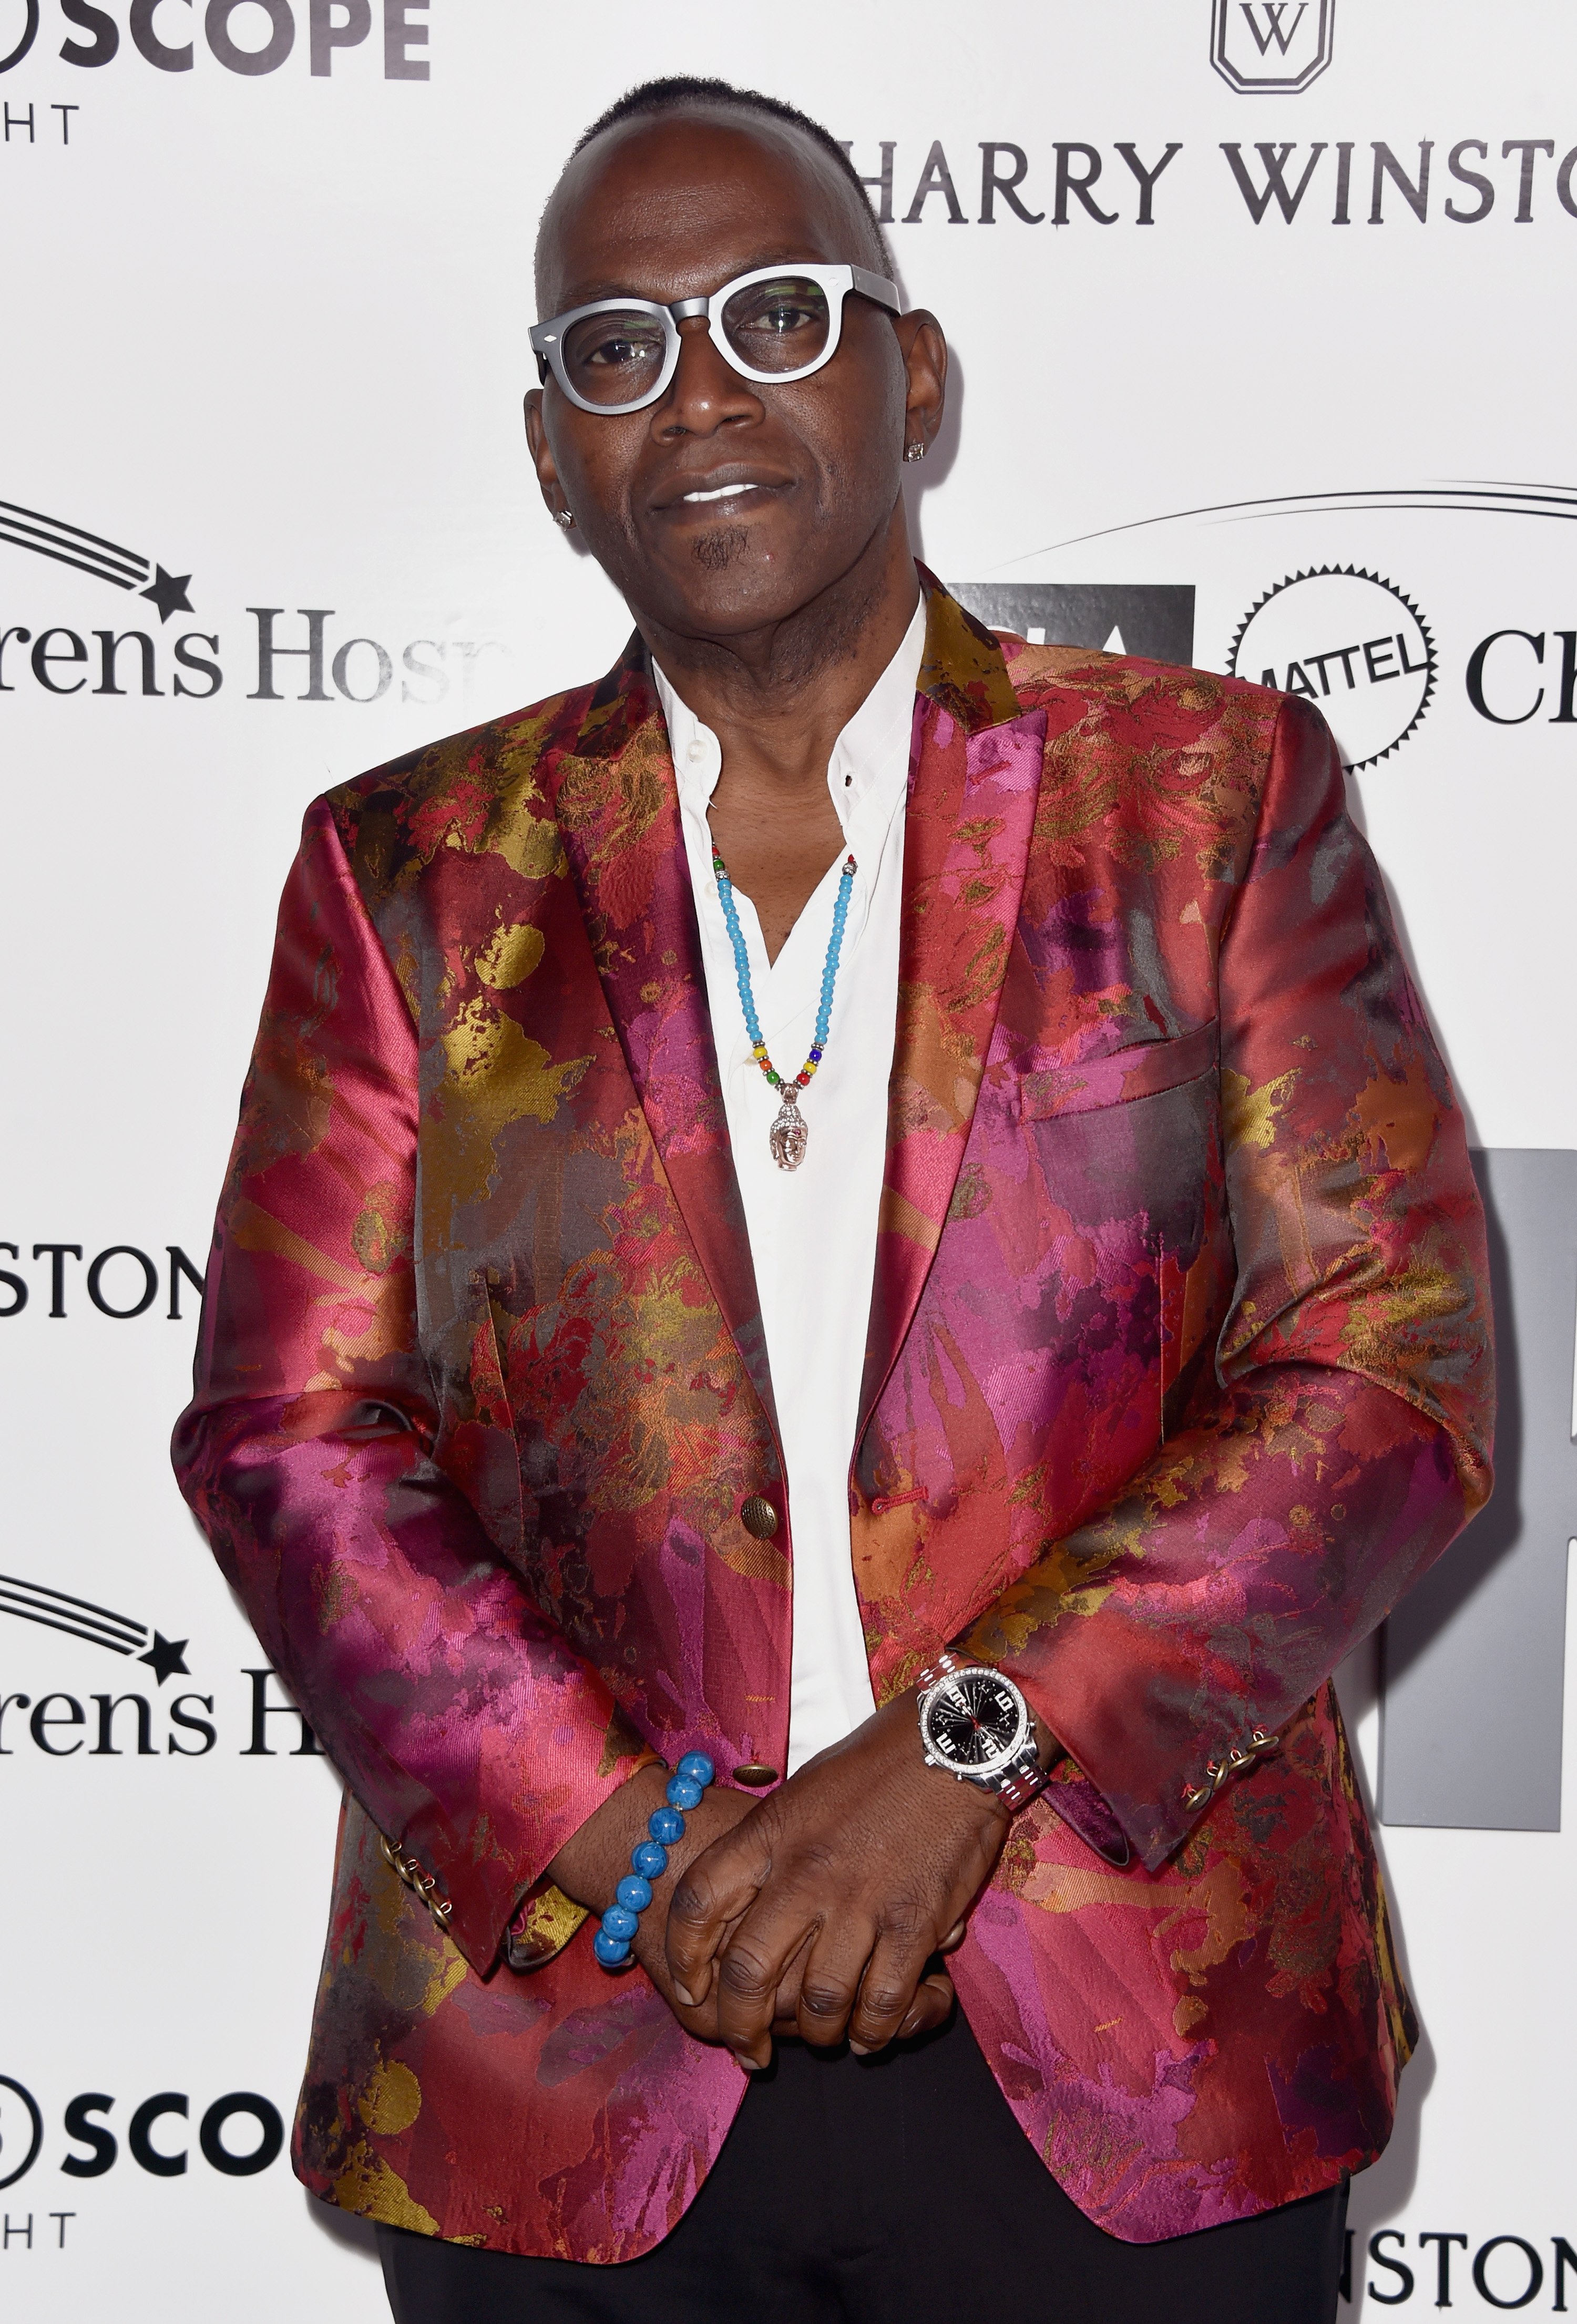 Randy Jackson at the UCLA Mattel Children's Hospital presents Kaleidoscope 5 event in California on May 6, 2017. | Photo: Getty Images